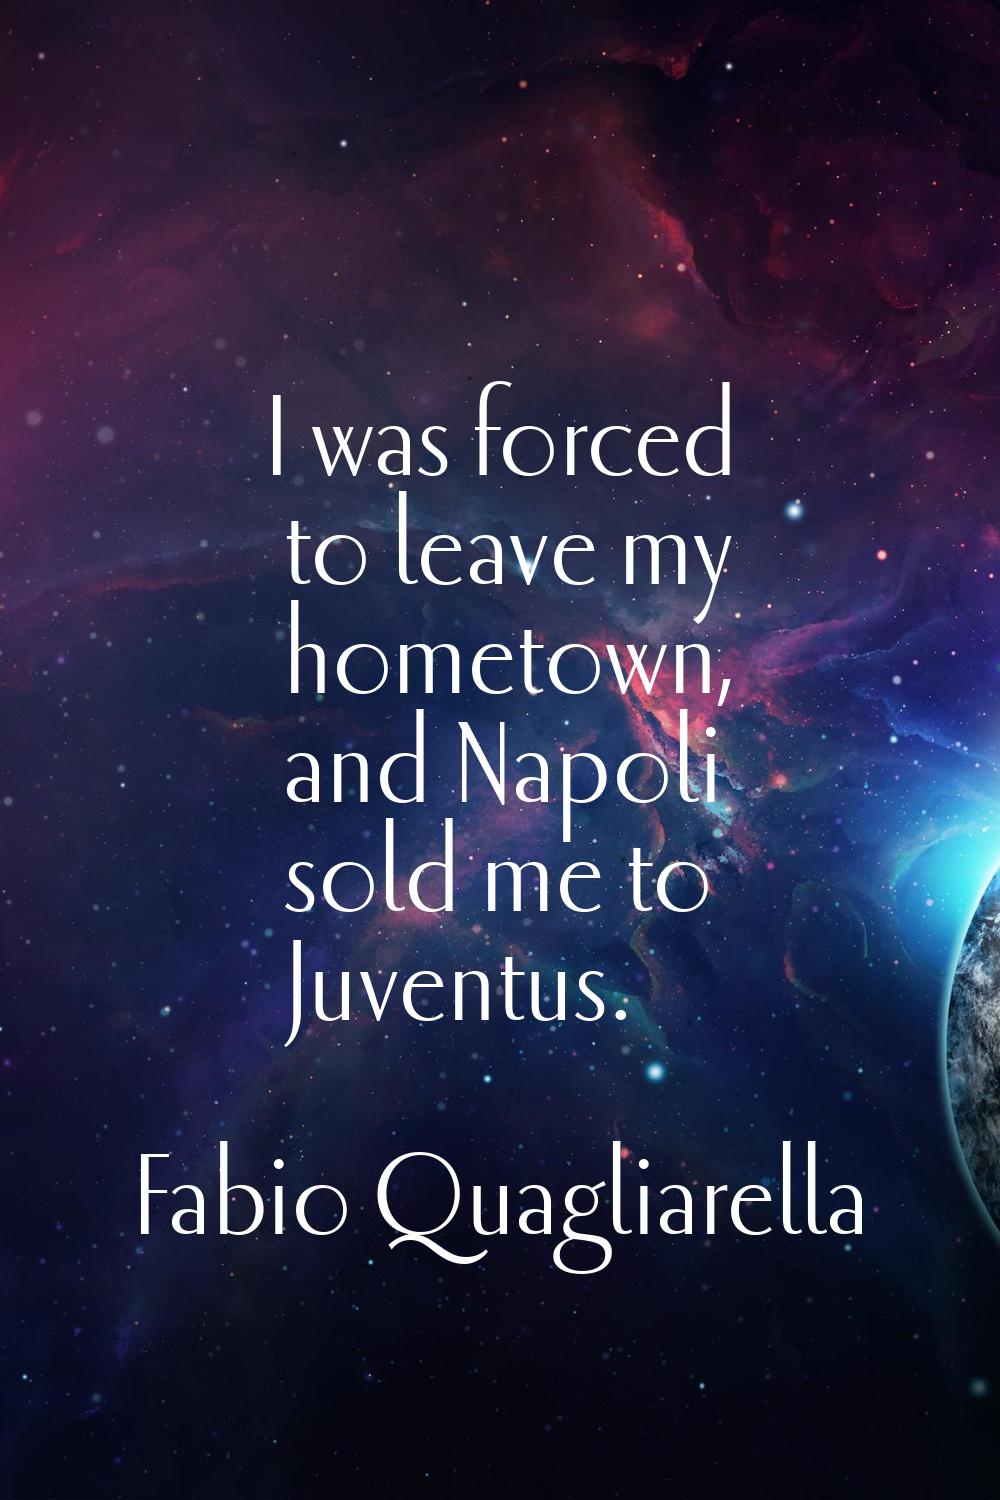 I was forced to leave my hometown, and Napoli sold me to Juventus.